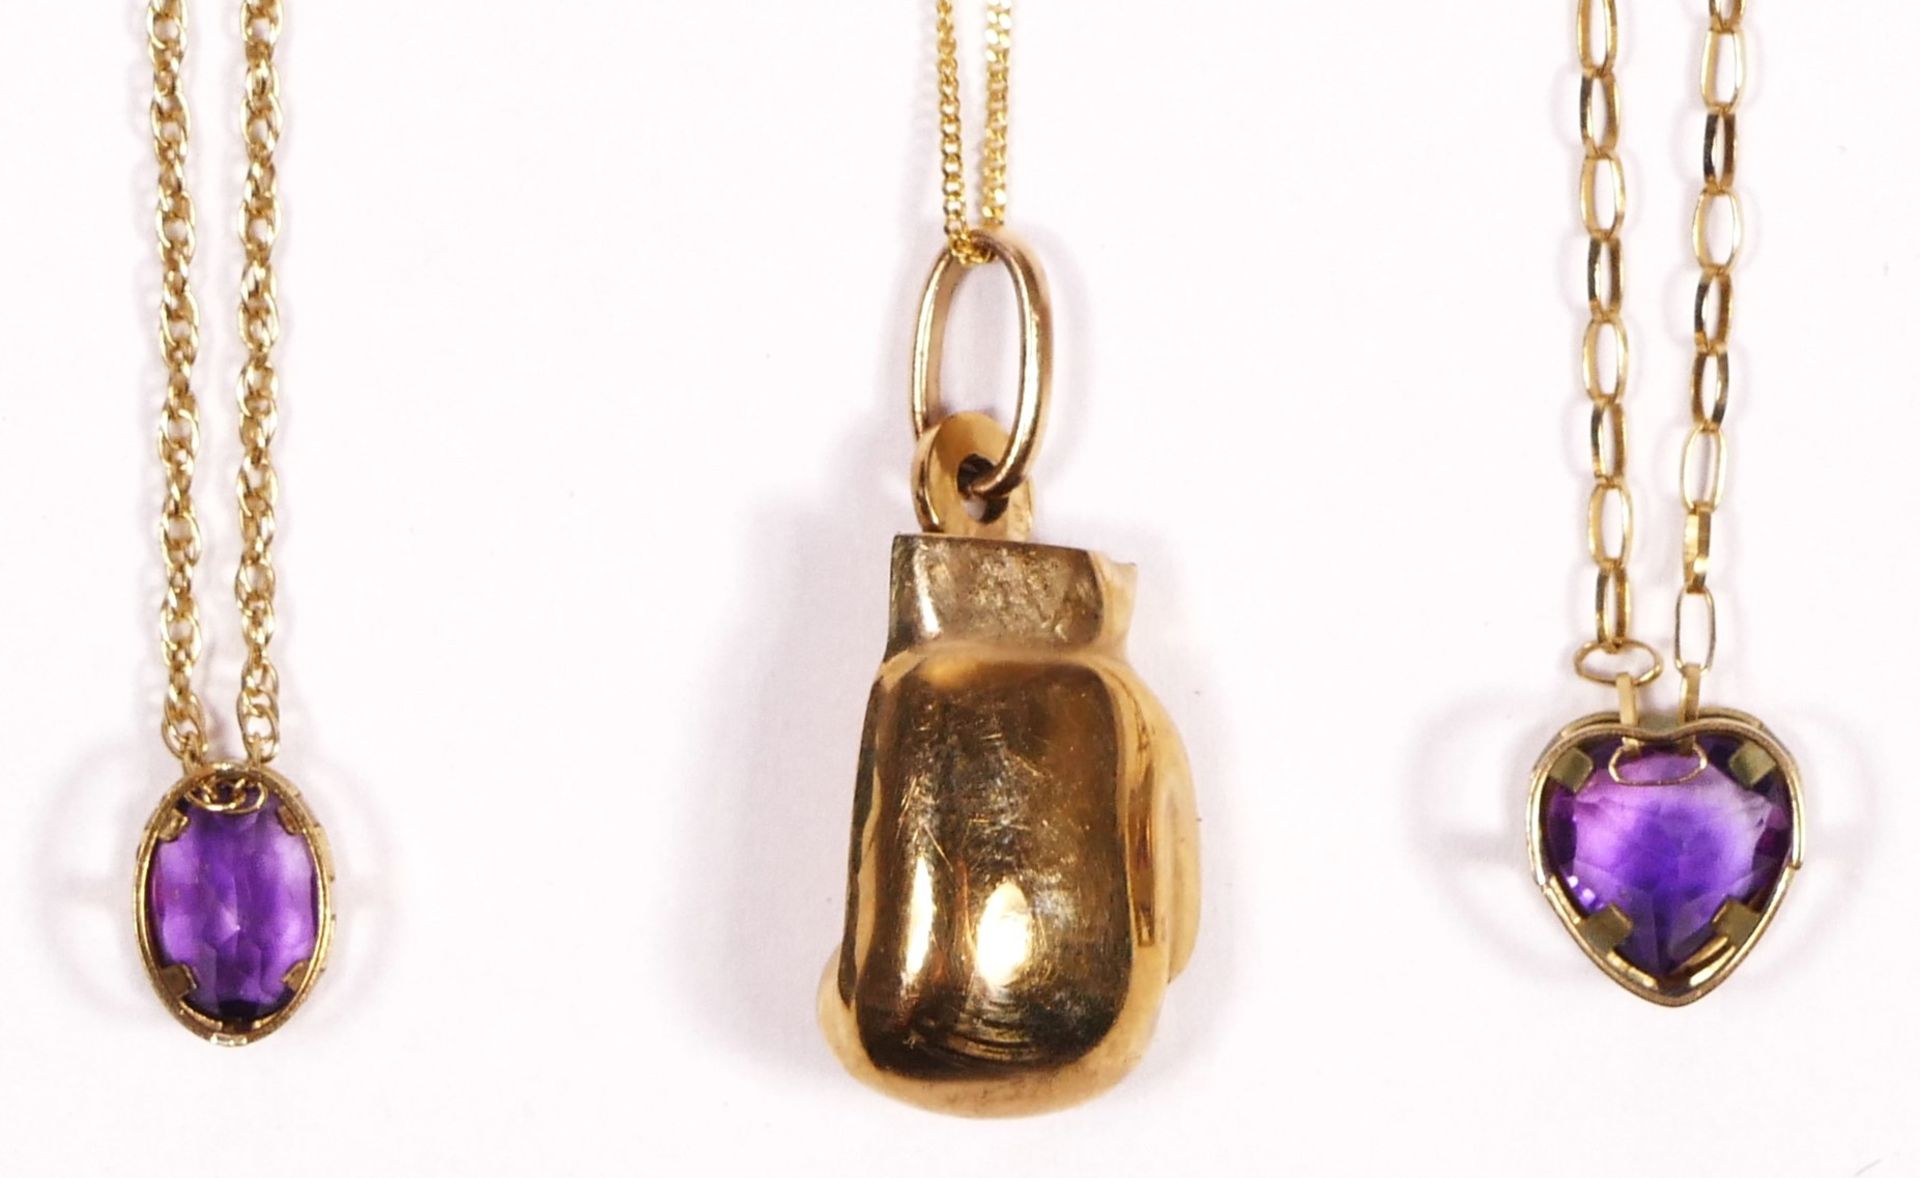 A 9ct gold boxing glove pendant, a 9ct gold amethyst pendant and a 9ct gold amethyst bracelet, 3.2gm - Image 2 of 3